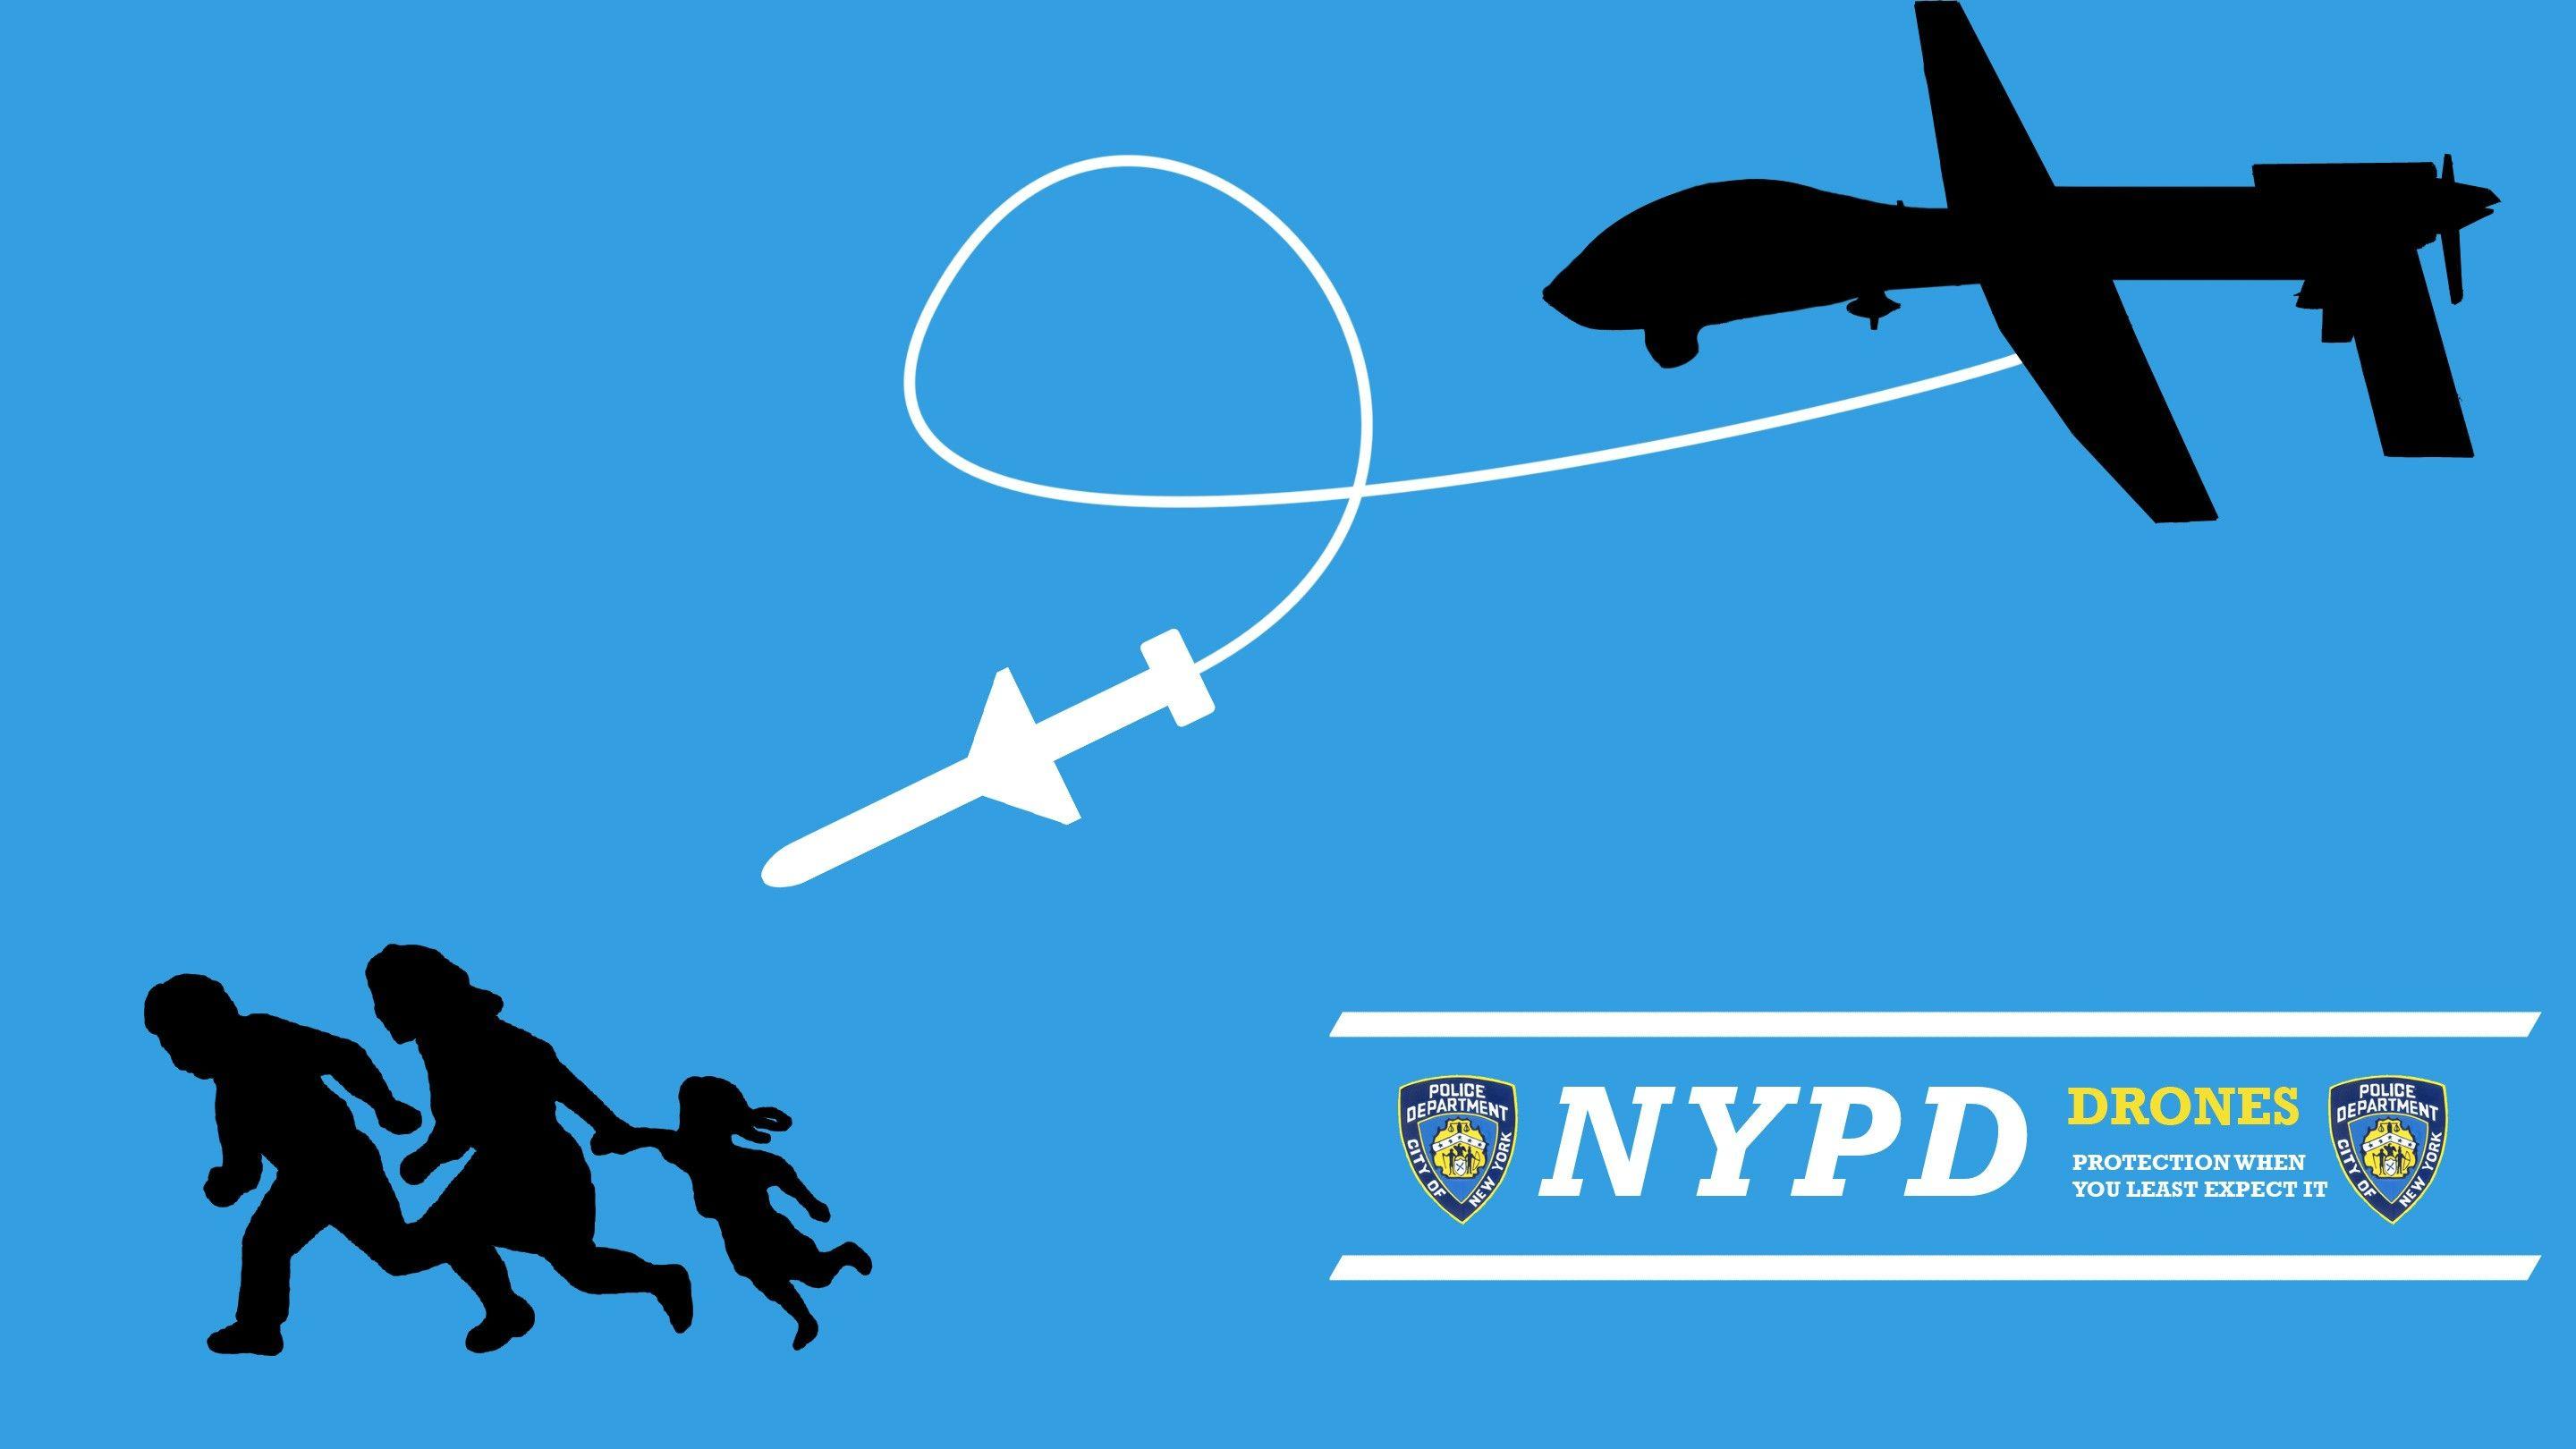 NYPD Drones